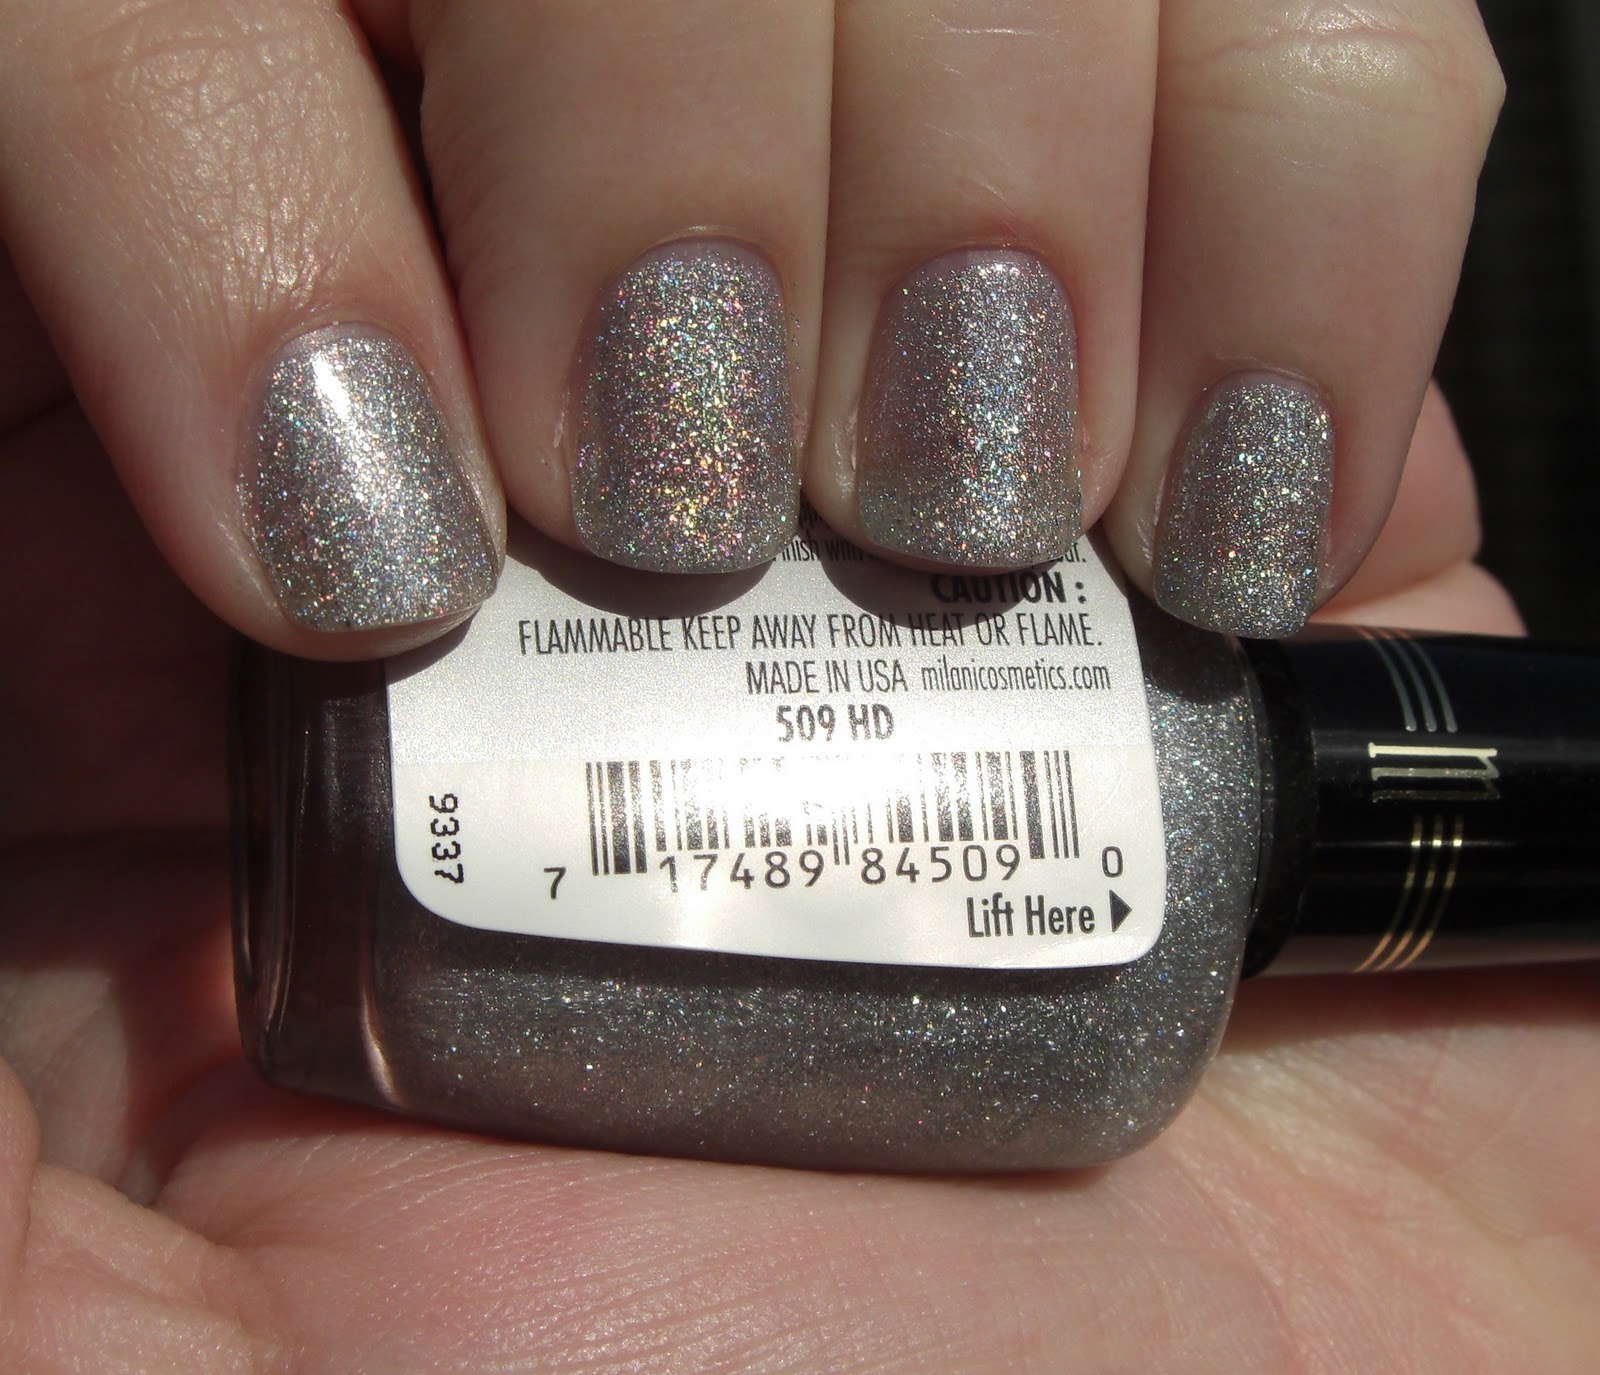 glitter obsession: Milani 3D Holographic Polish in HD